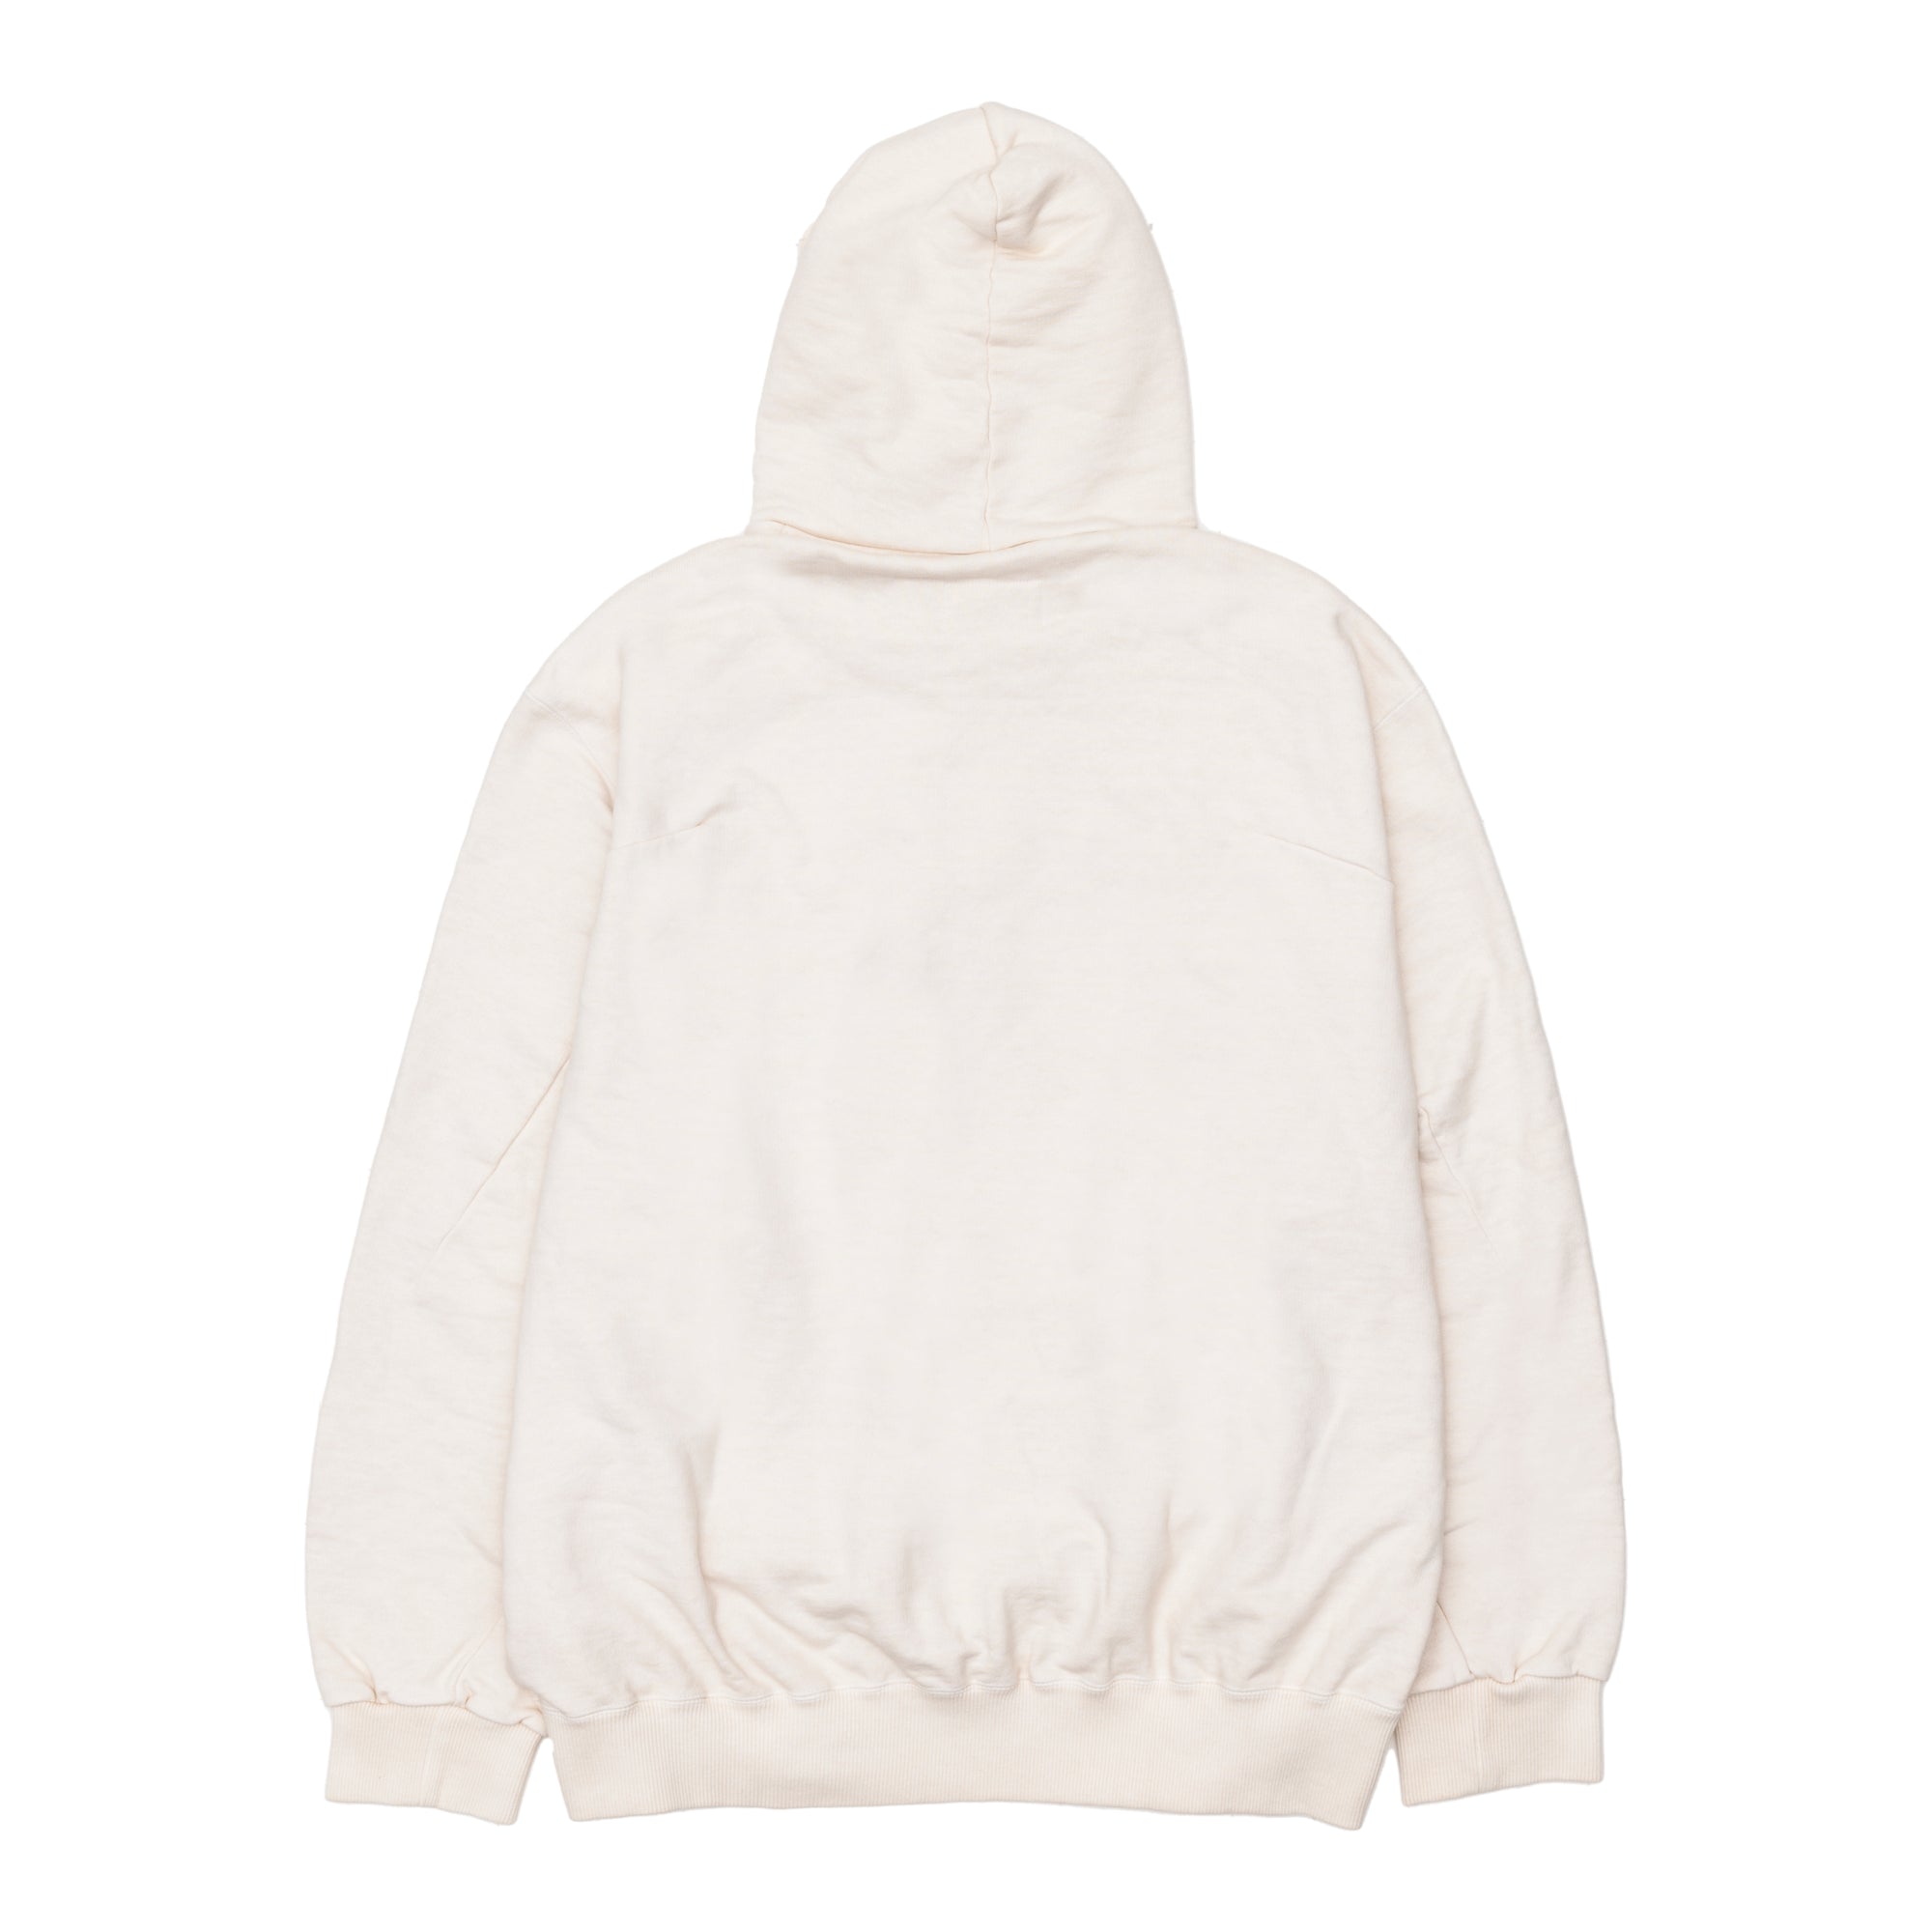 DOUBLET - "Doubland" Embroidery Hoodie - (White) view 2